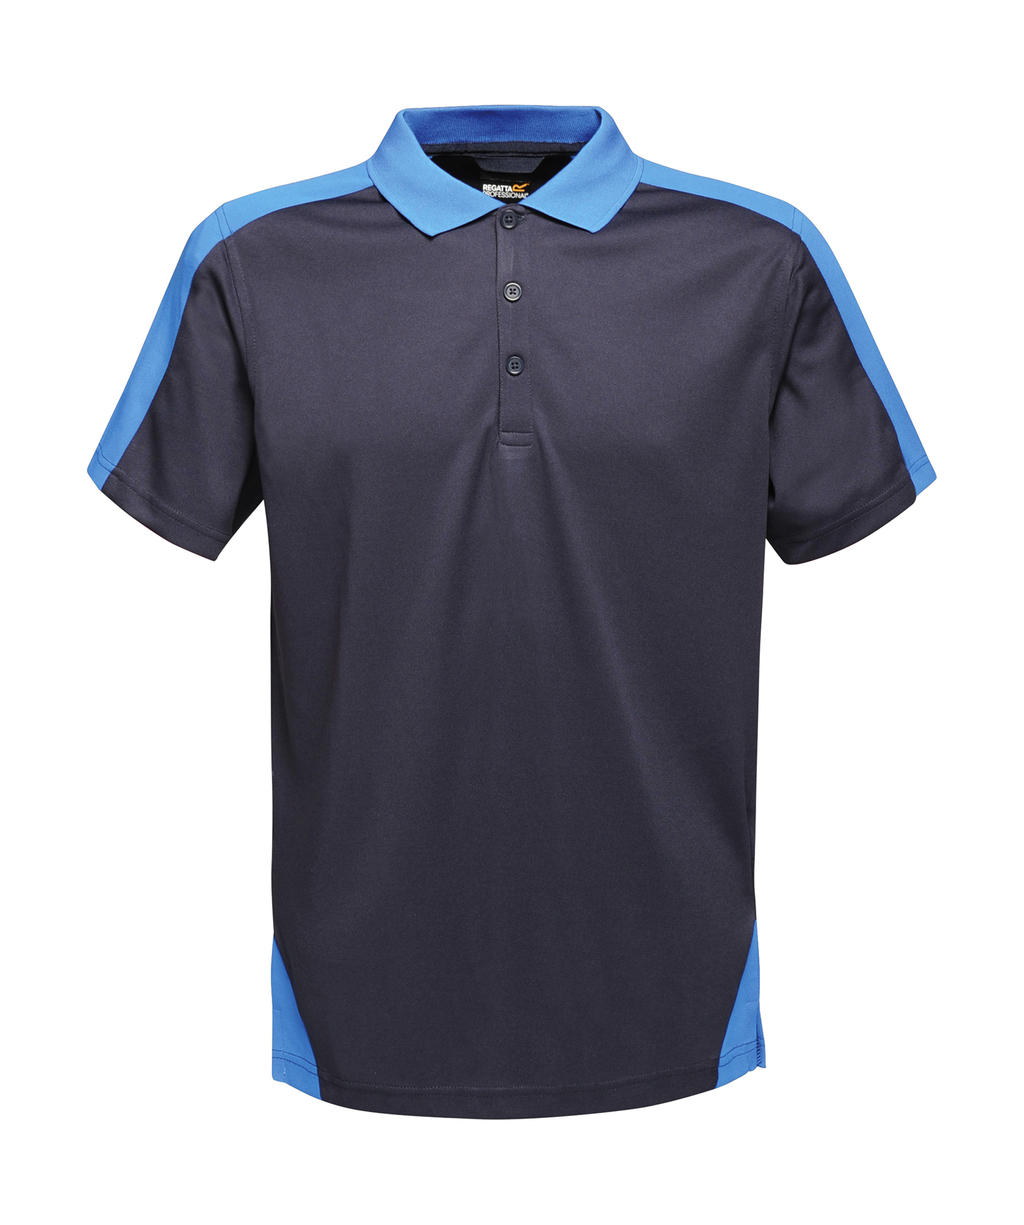  Contrast Coolweave Polo in Farbe Navy/New Royal